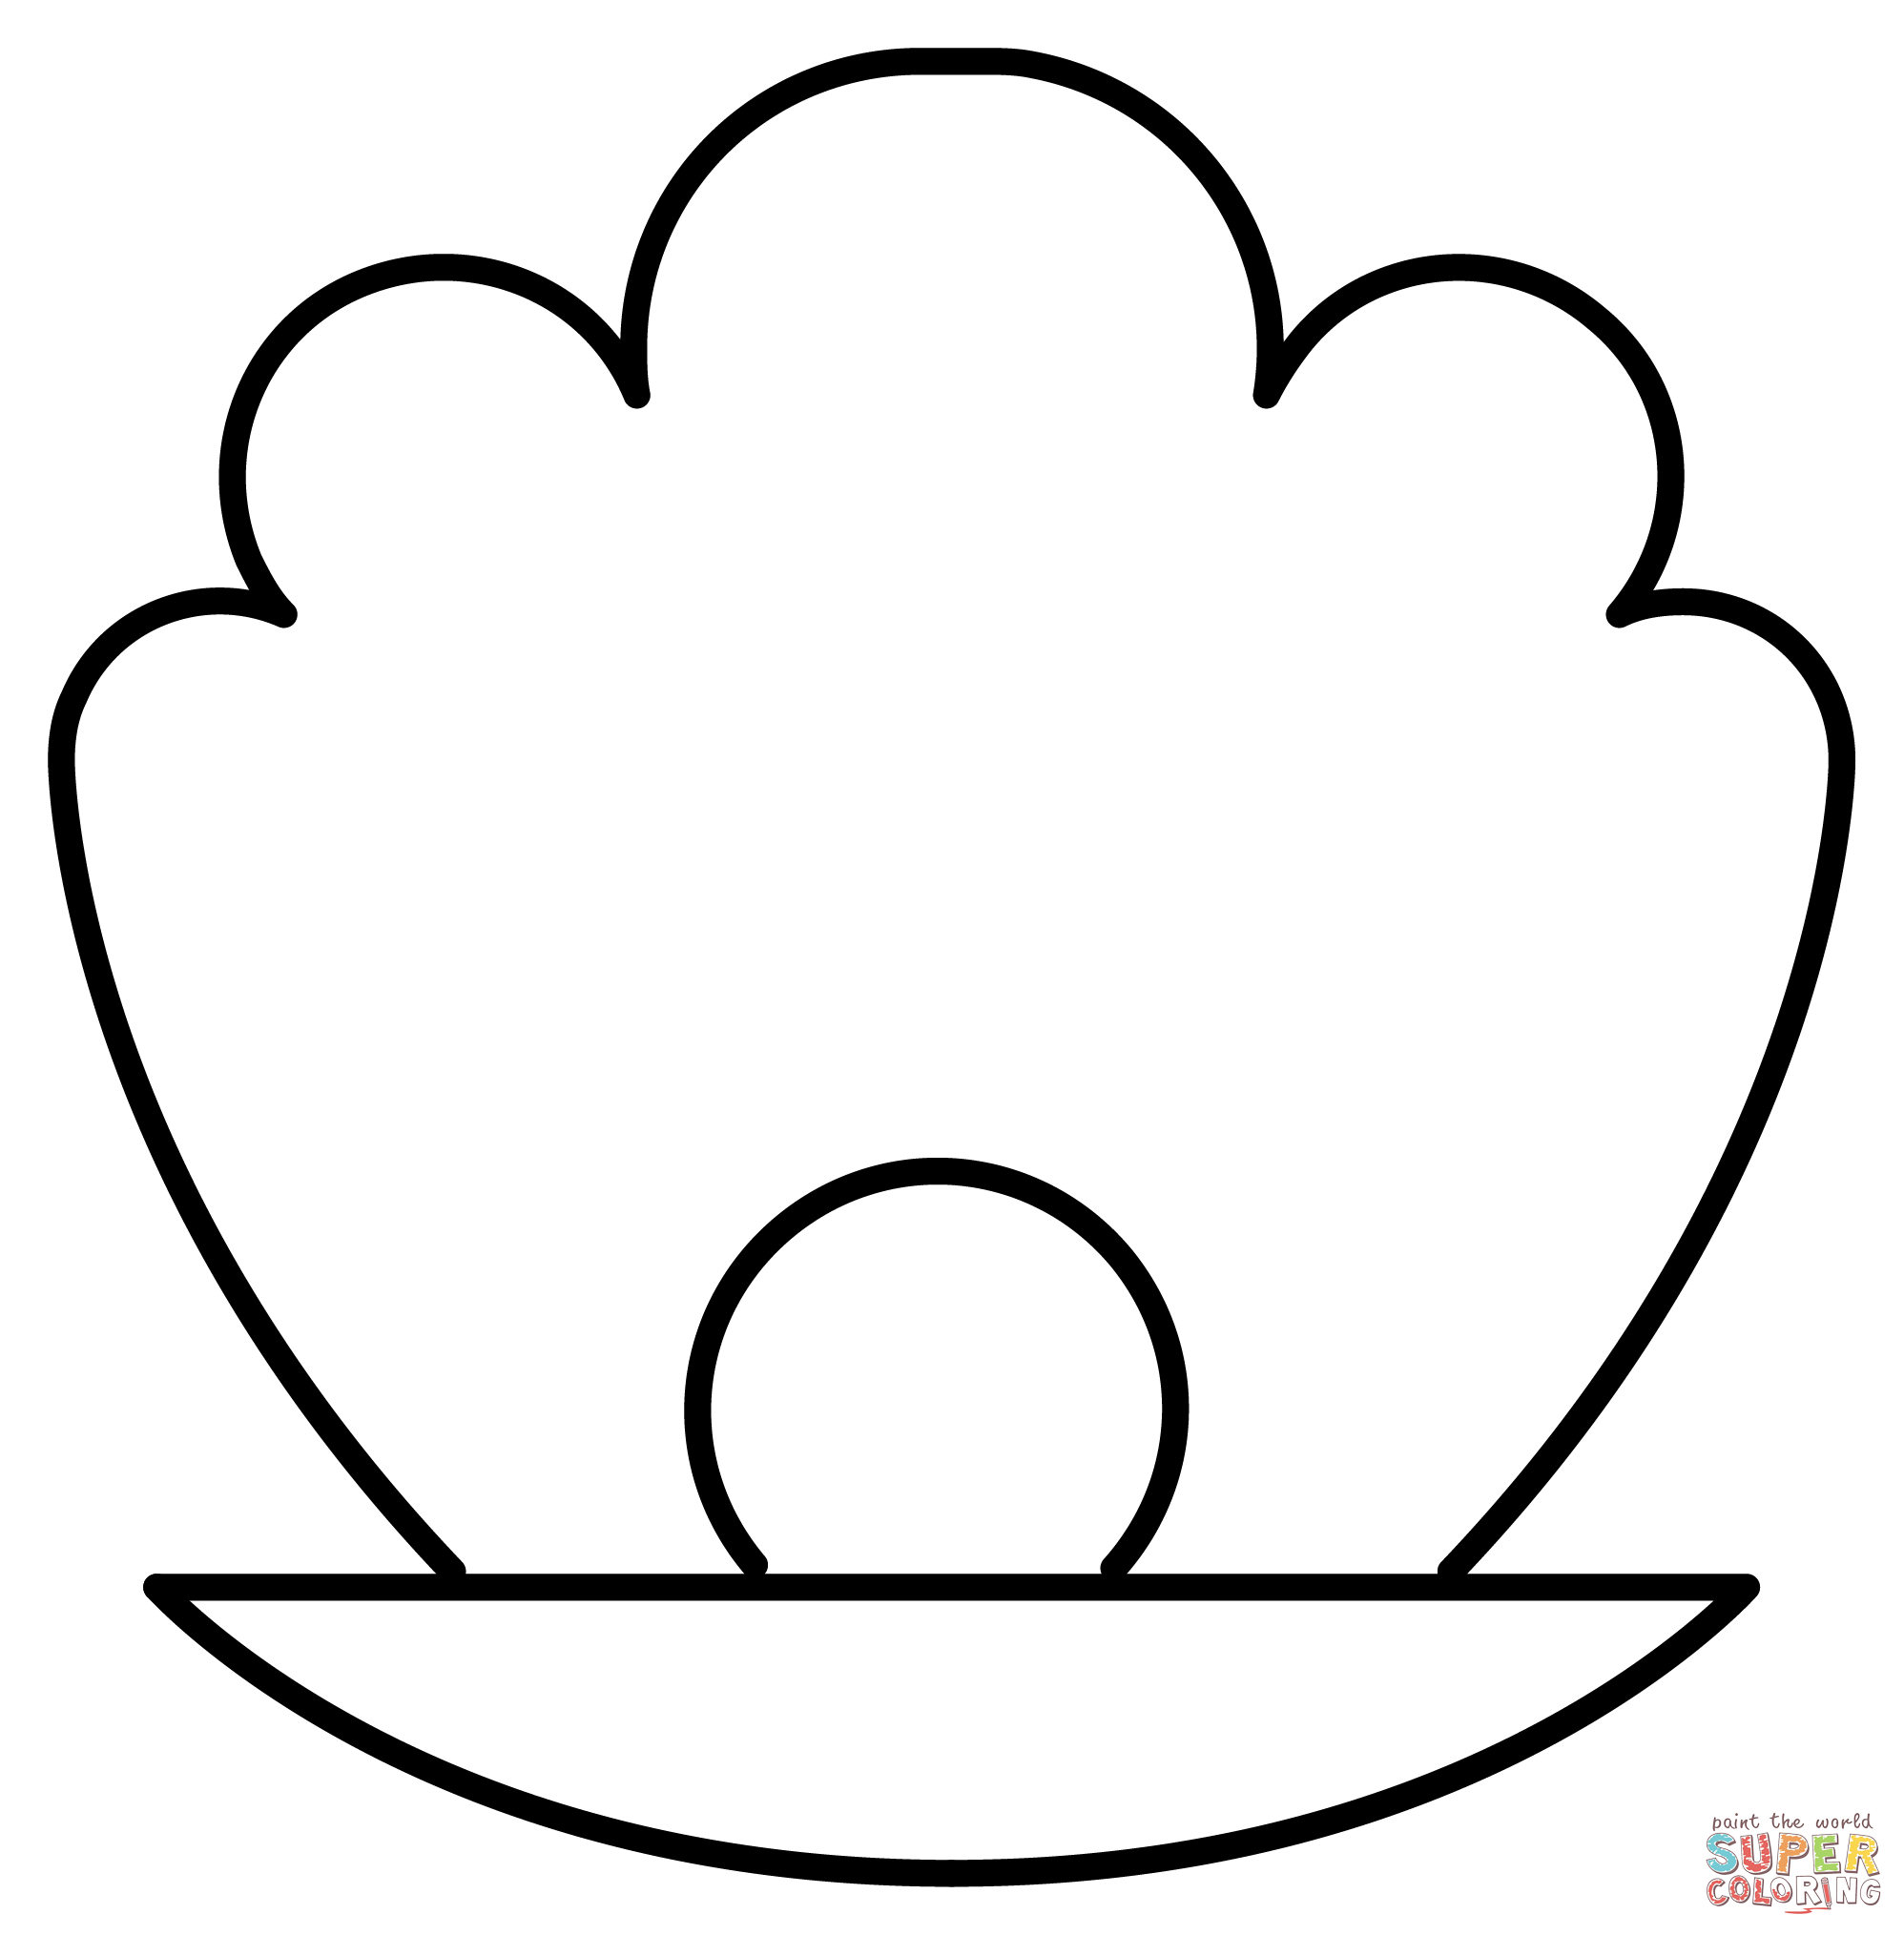 Oyster Emoji coloring page | Free Printable Coloring Pages